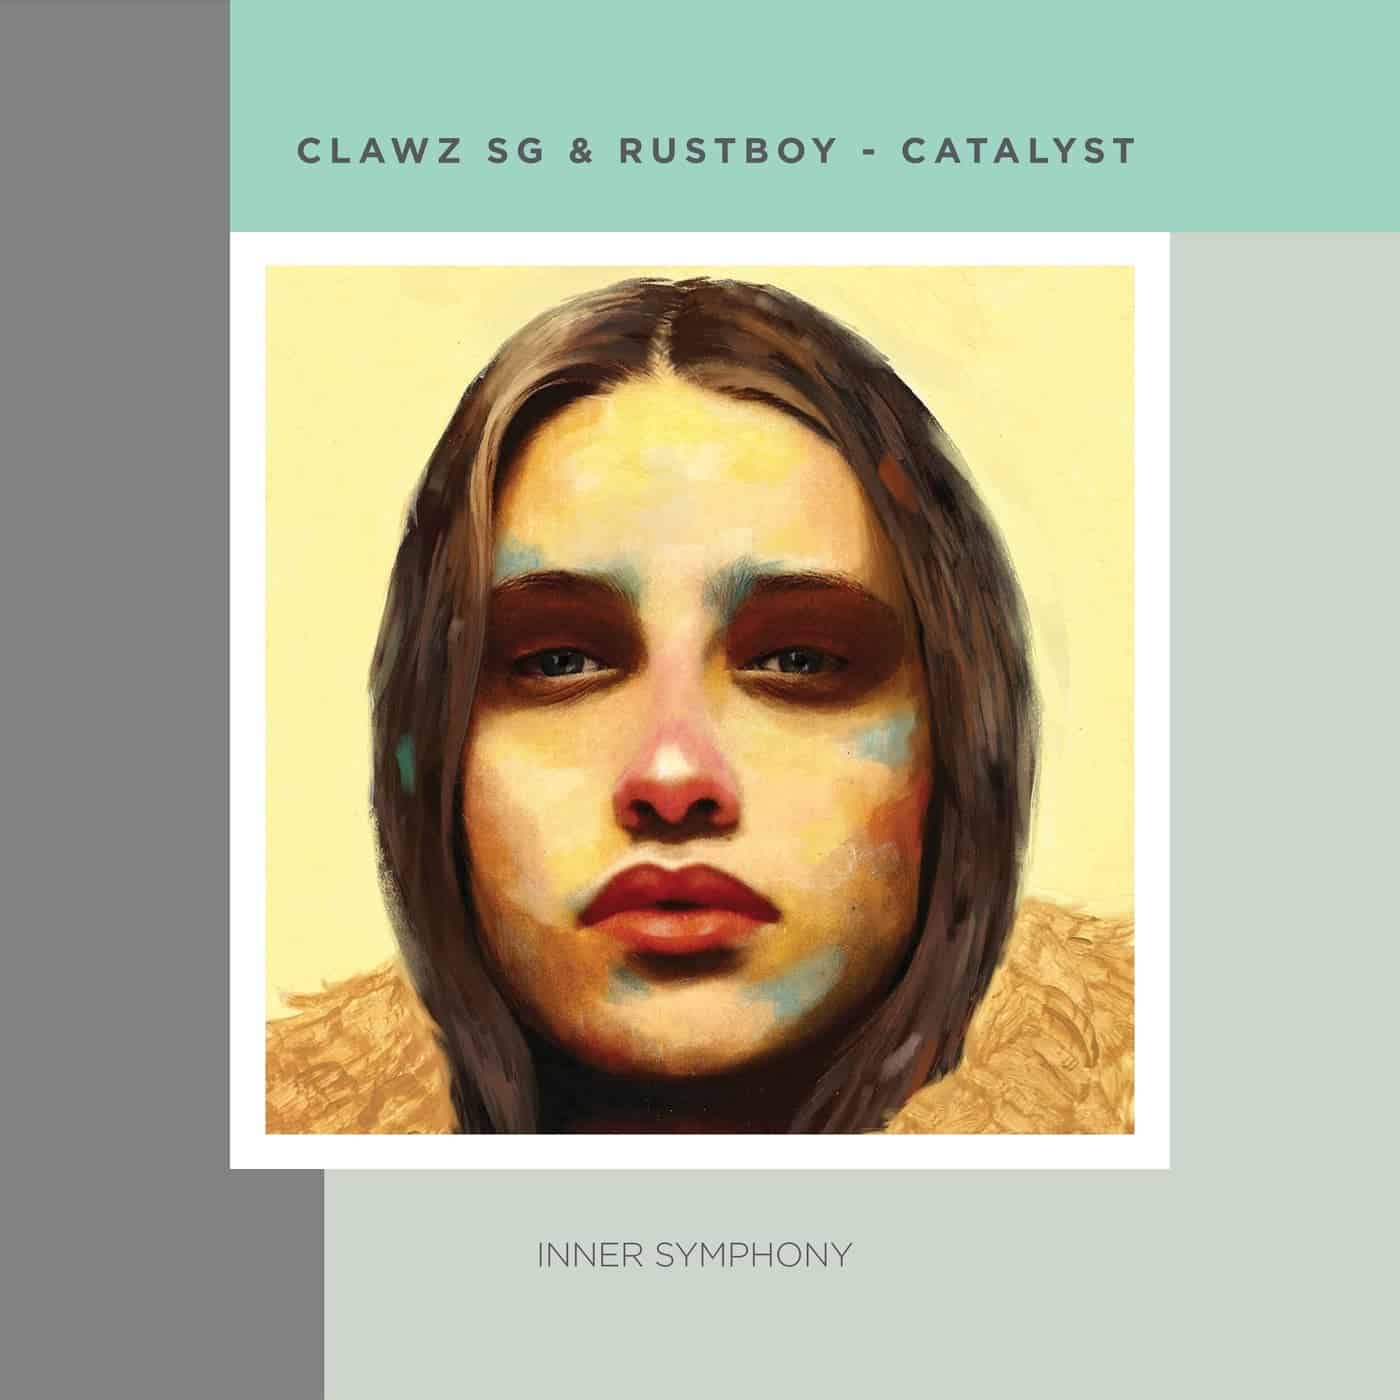 image cover: Clawz SG, Rustboy - Catalyst / IS053